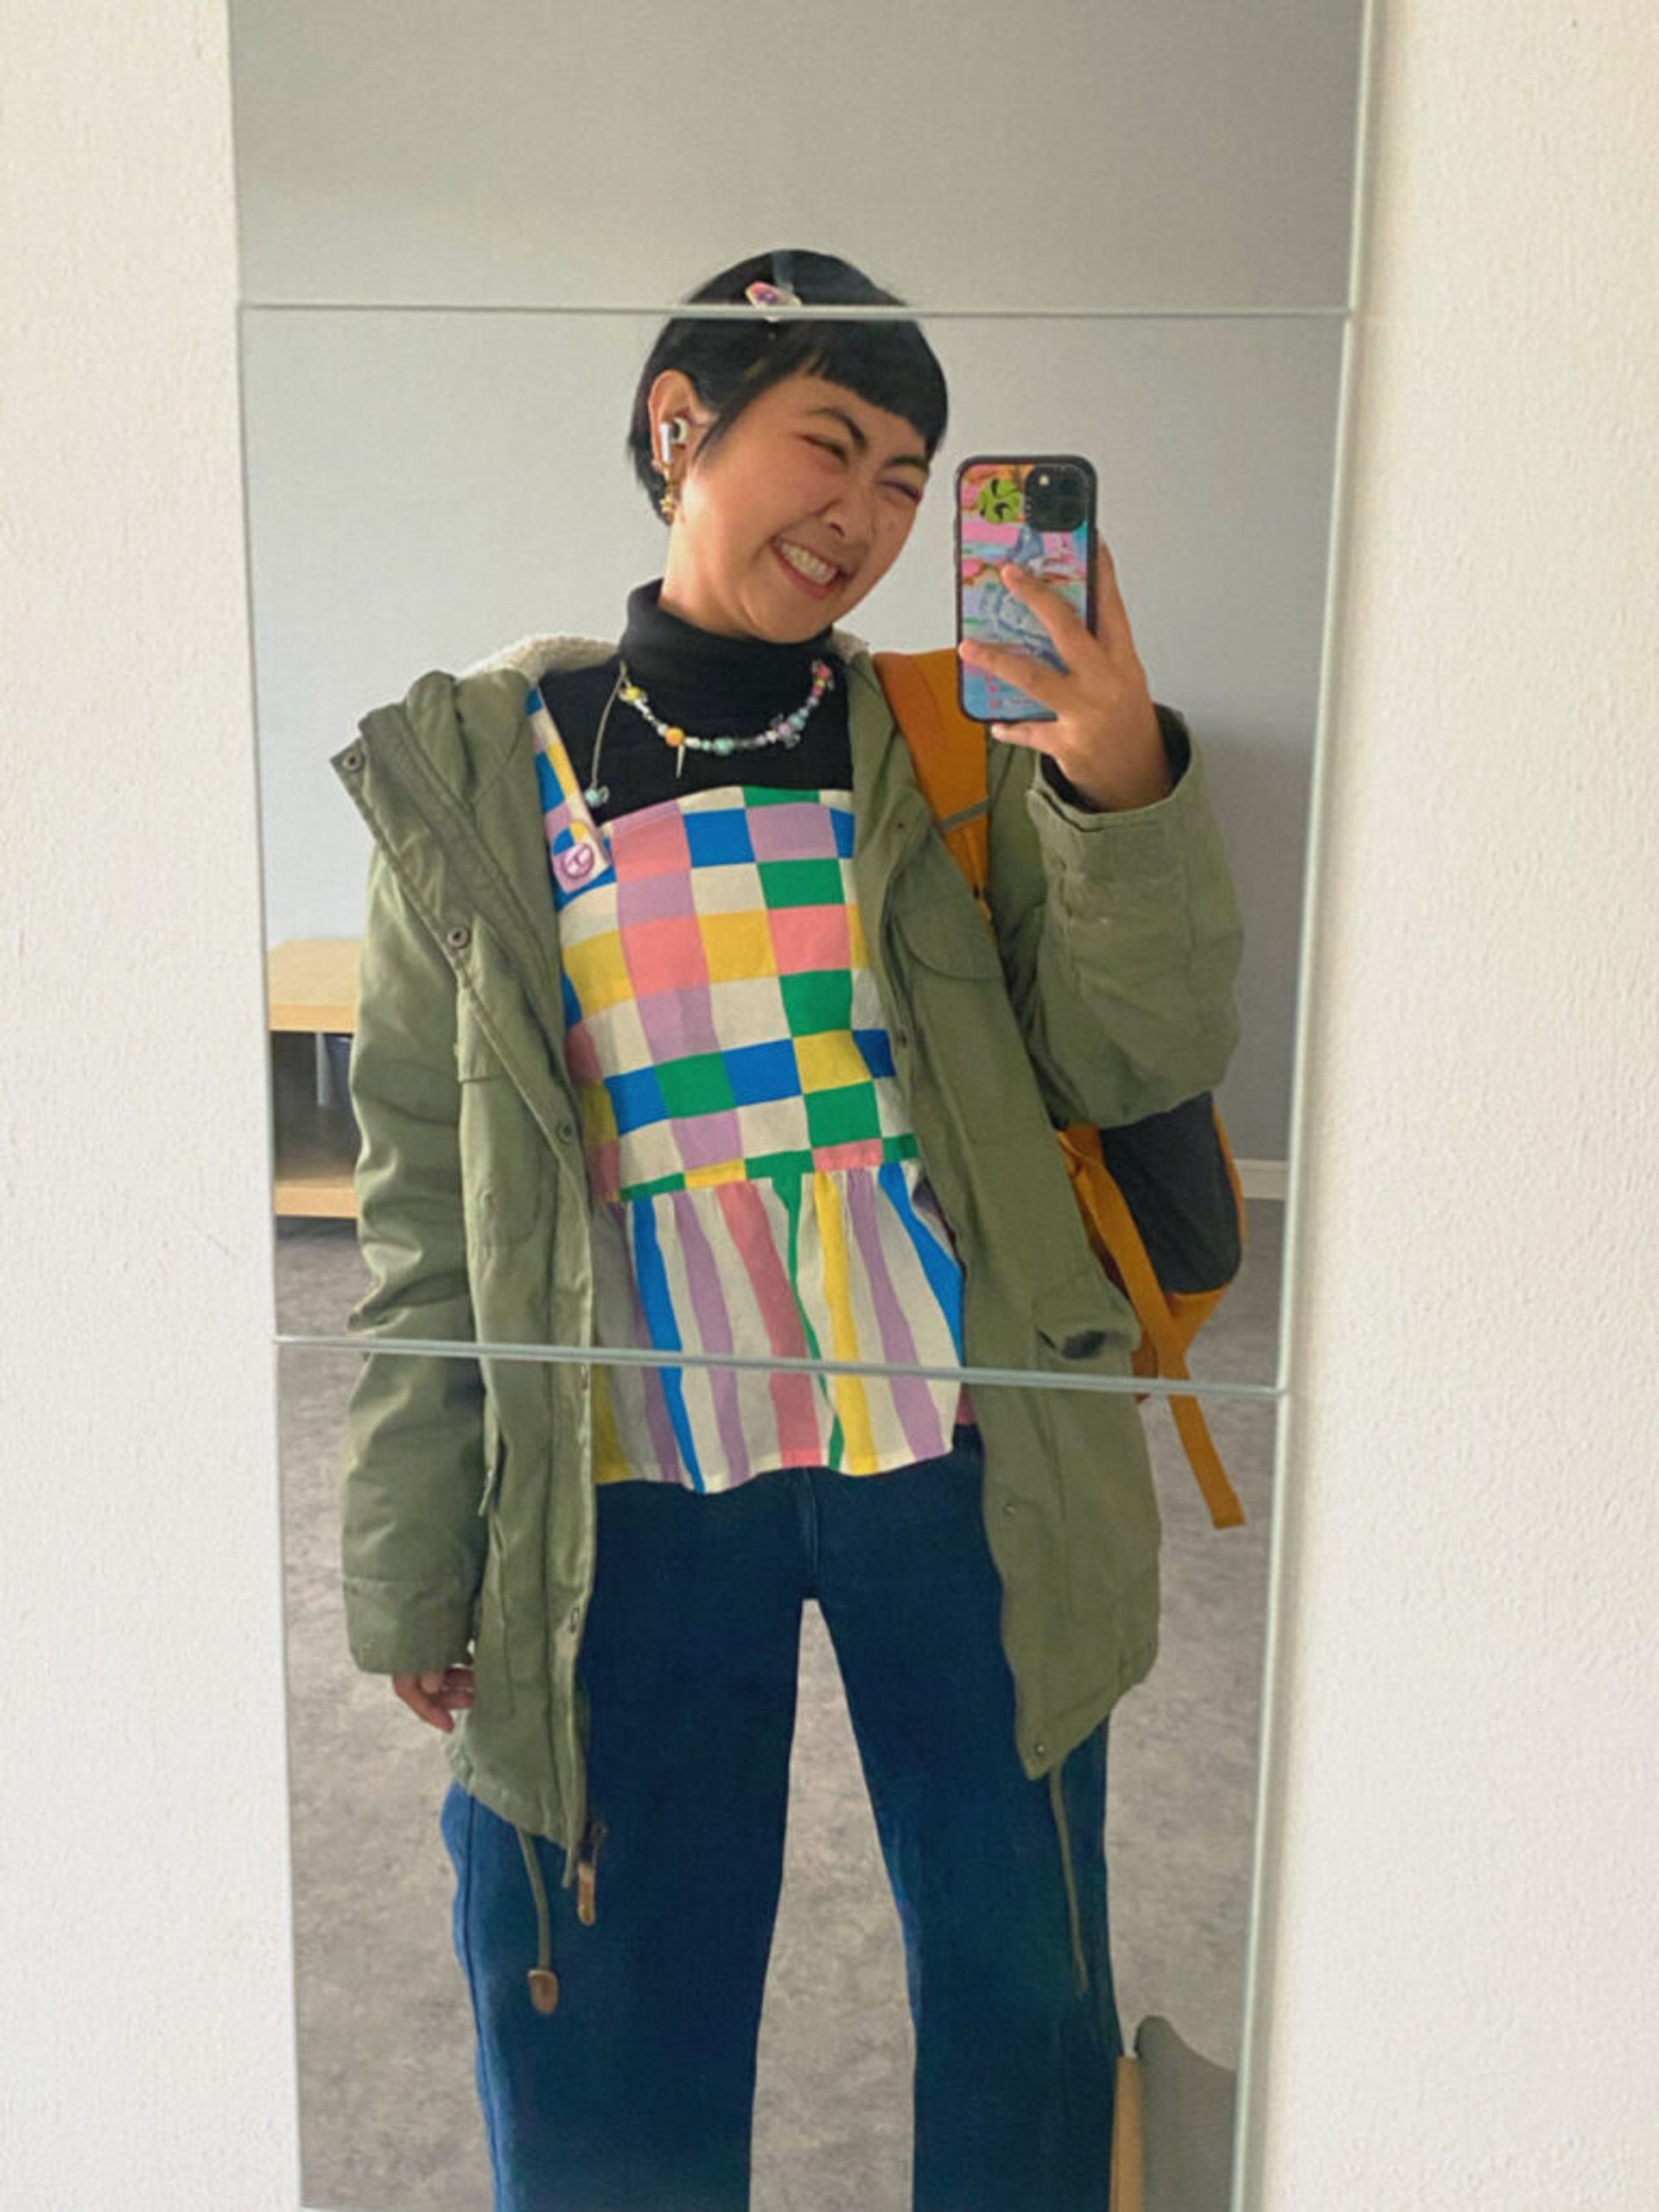 Mirror selfie of an international student in the accommodation, wearing colourful winter clothes